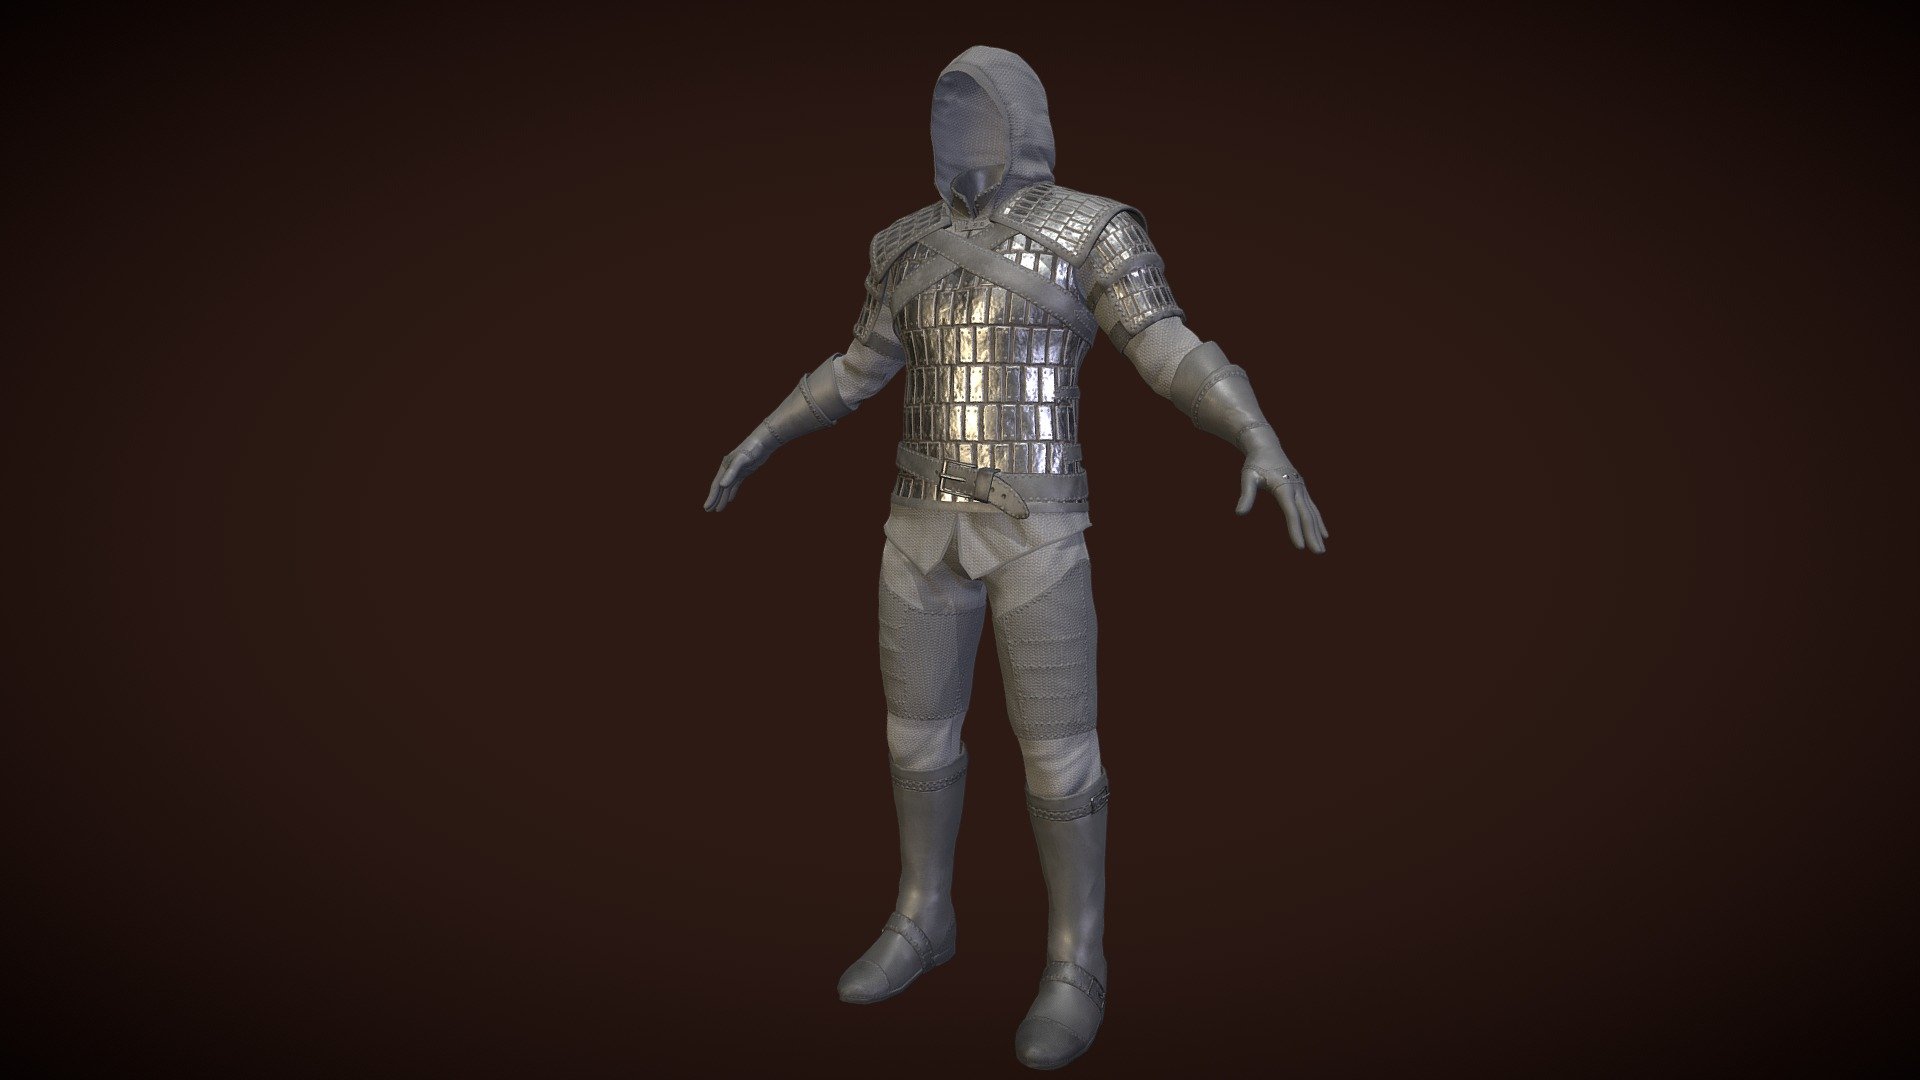 The Adventurer Leather Armor Light

Inspired by The Witcher (Geralt)

This armor is not rigged.

I have included an FBX file along with the dae file from Substance Painter.

Please make sure to inspect the model thoroughly before making your purchase.

If there are any issues please message me before leaving bad feedback.

I can be contacted through sketchfab and also email and my facebook page.

Email: azazel_d2@hotmail.com

Facebook: https://www.facebook.com/ReaperProductions - The Adventurer Leather - Fantasy Style Armor - Buy Royalty Free 3D model by Slayerazazel (@azazeld2) 3d model